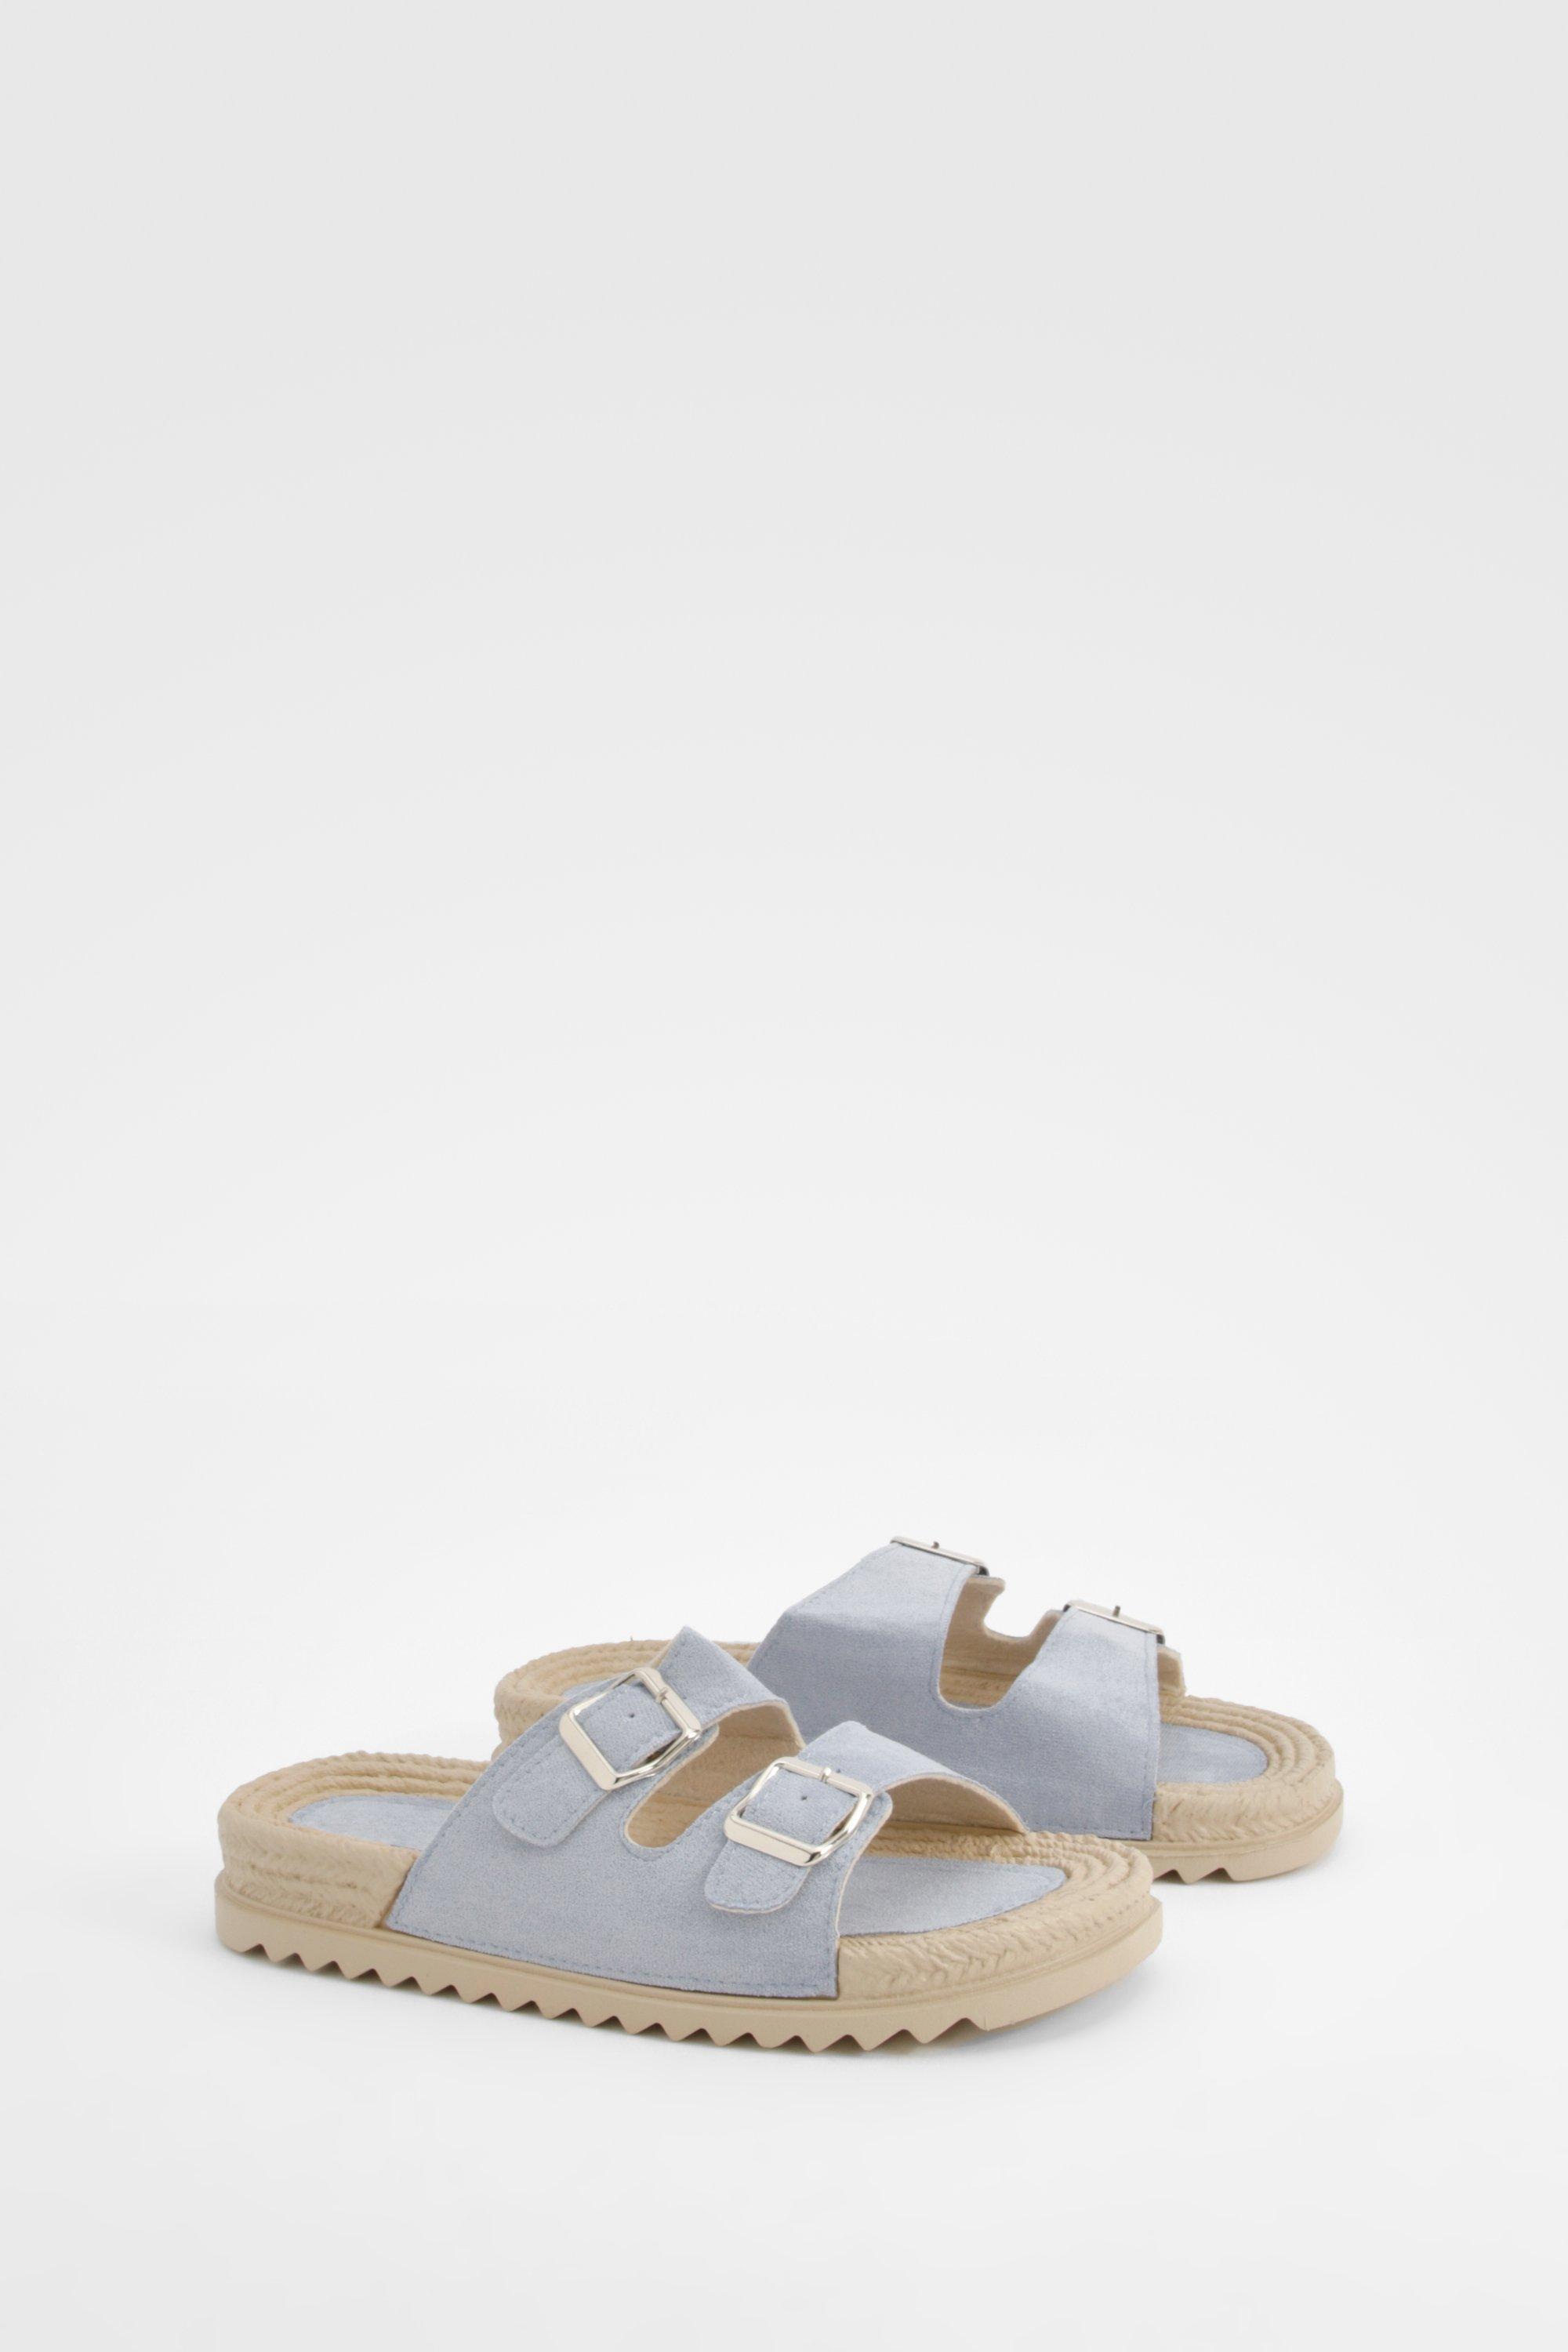 Image of Double Strap Buckle Detail Espadrille Sliders, Azzurro